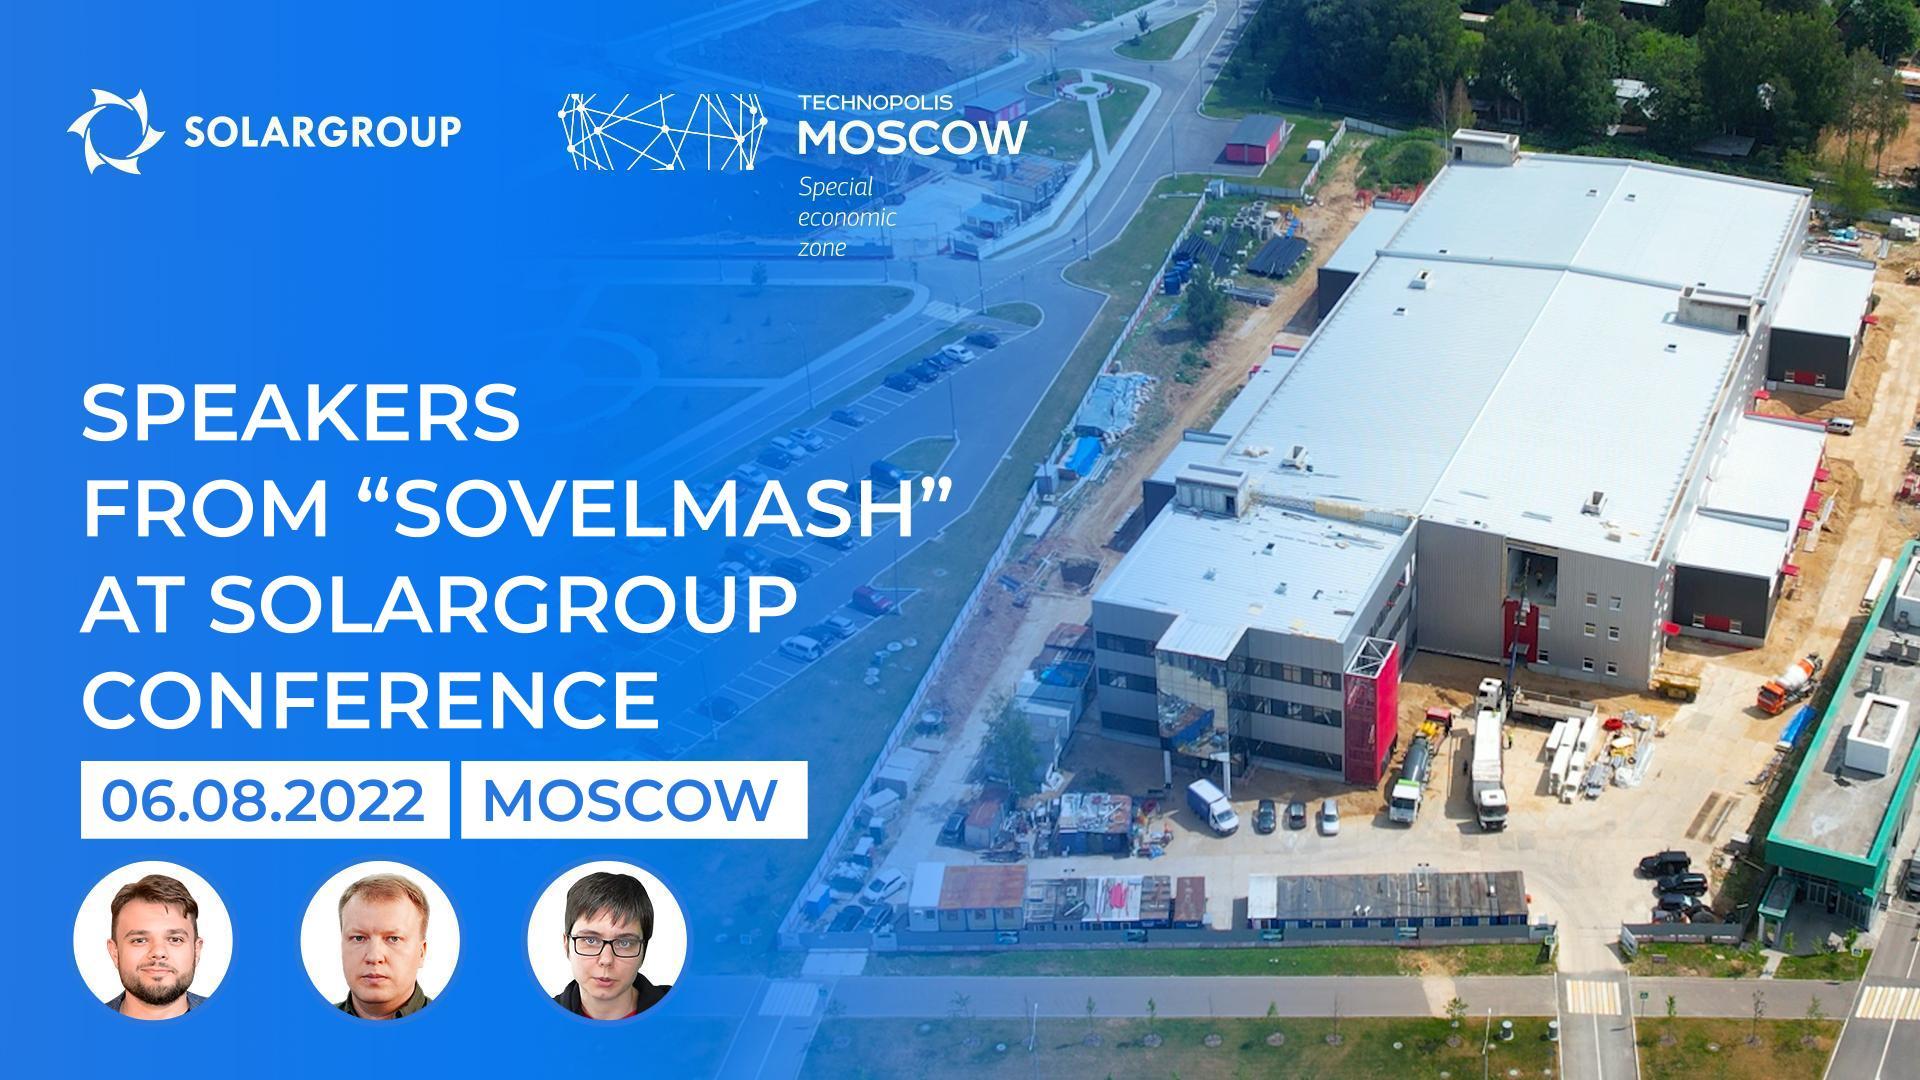 Speakers from "Sovelmash" at SOLARGROUP conference